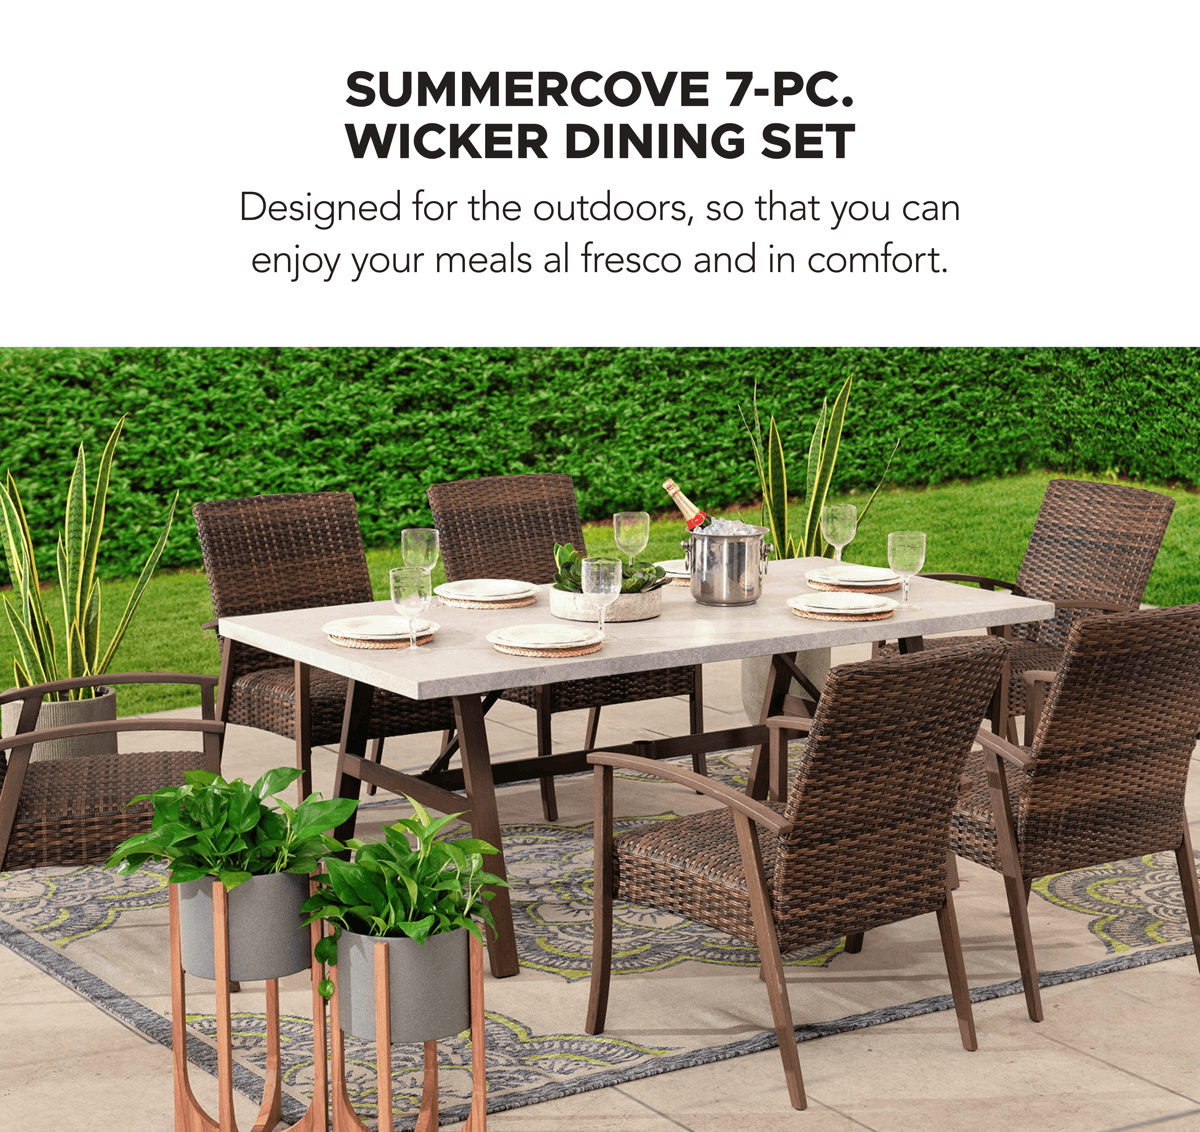 SummerCove 7-pc. Wicker Dining Set with Umbrella Hole